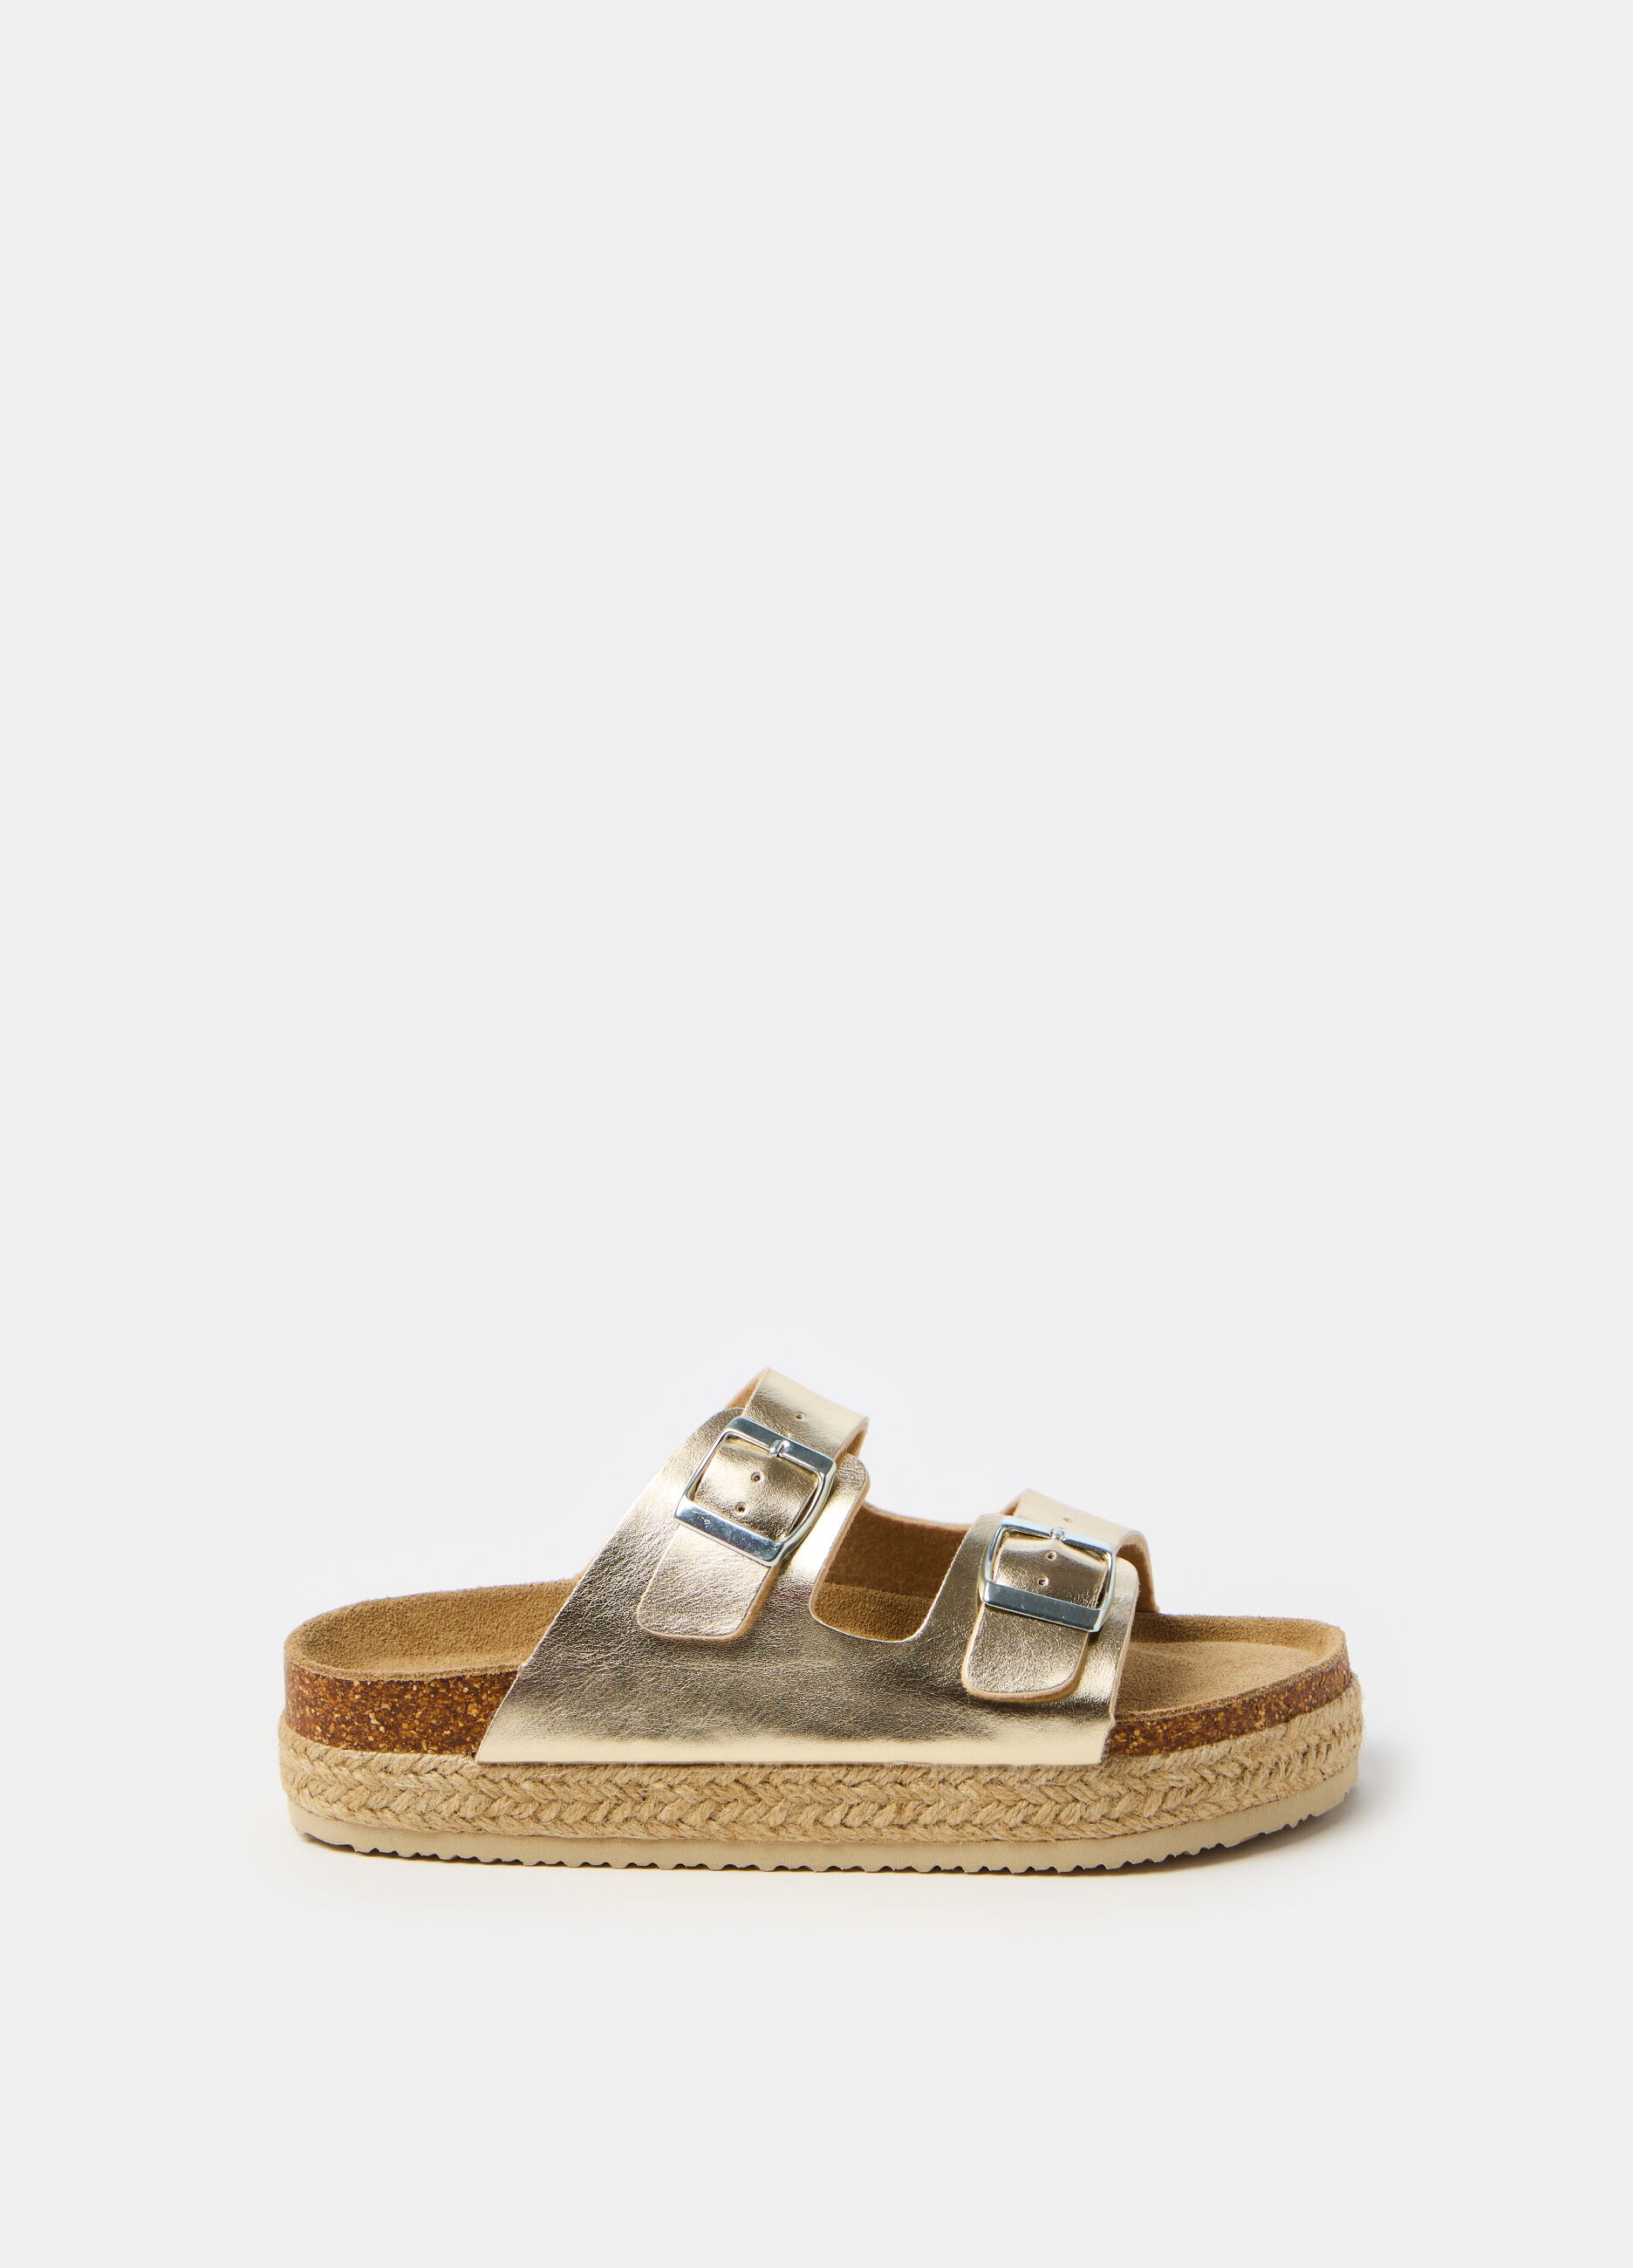 High metallic sandals with double band